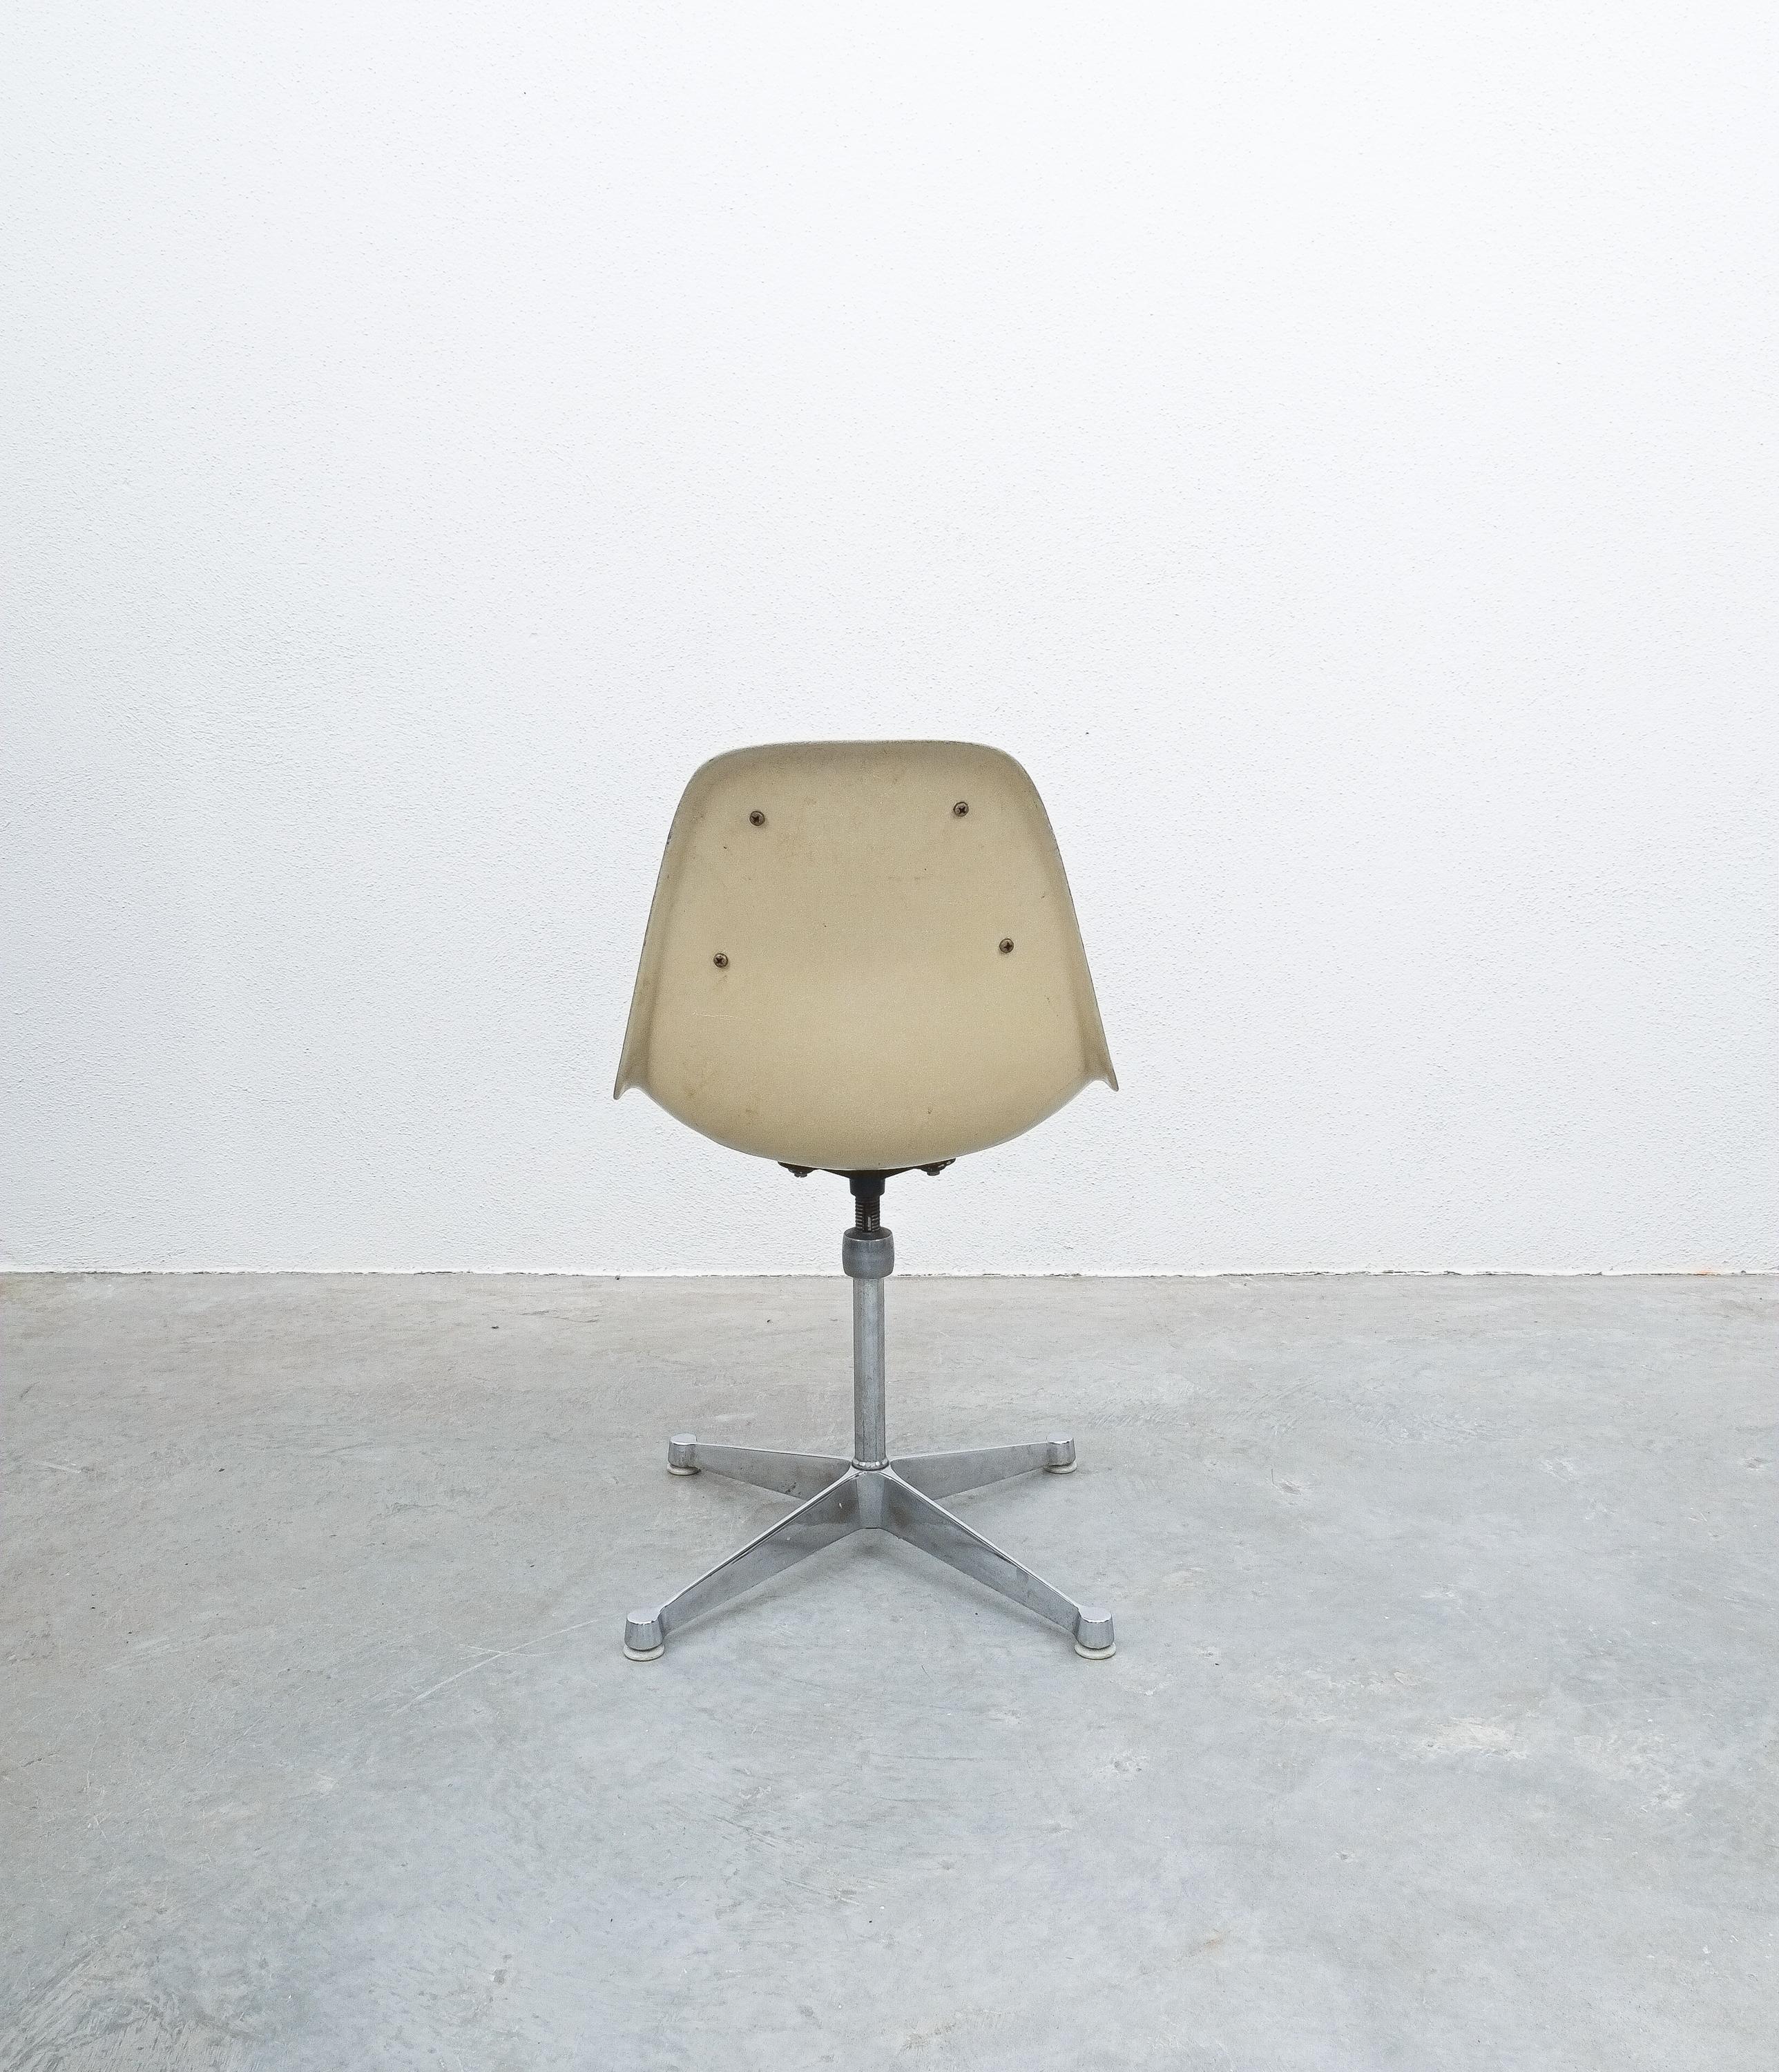 American PSCC4 Fiberglass Swivel Chair for Miller Ray and Charles Eames, circa 1960